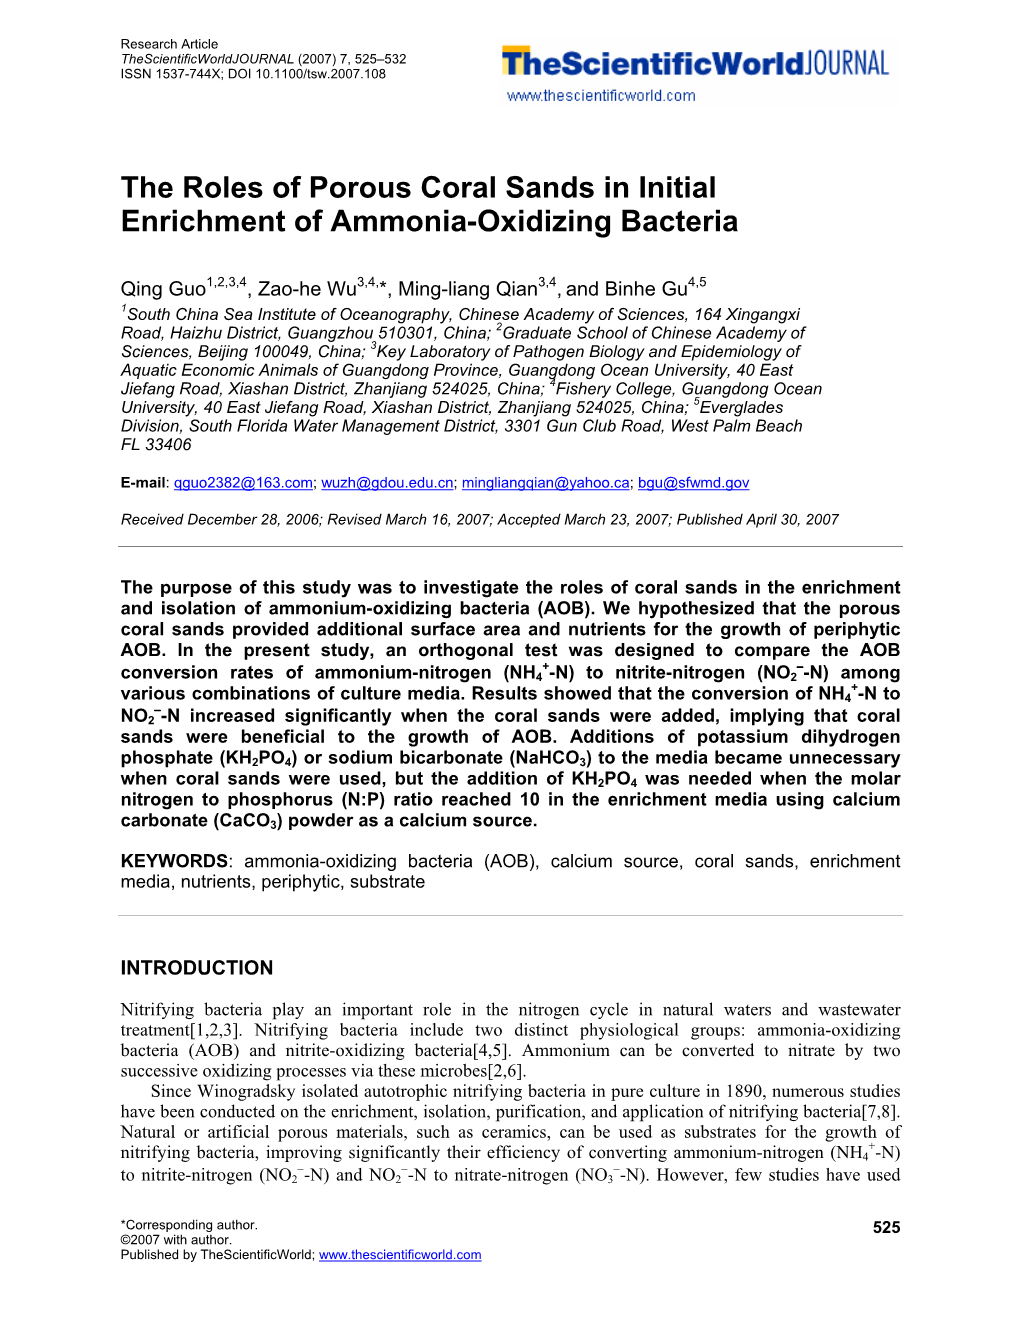 The Roles of Porous Coral Sands in Initial Enrichment of Ammonia-Oxidizing Bacteria